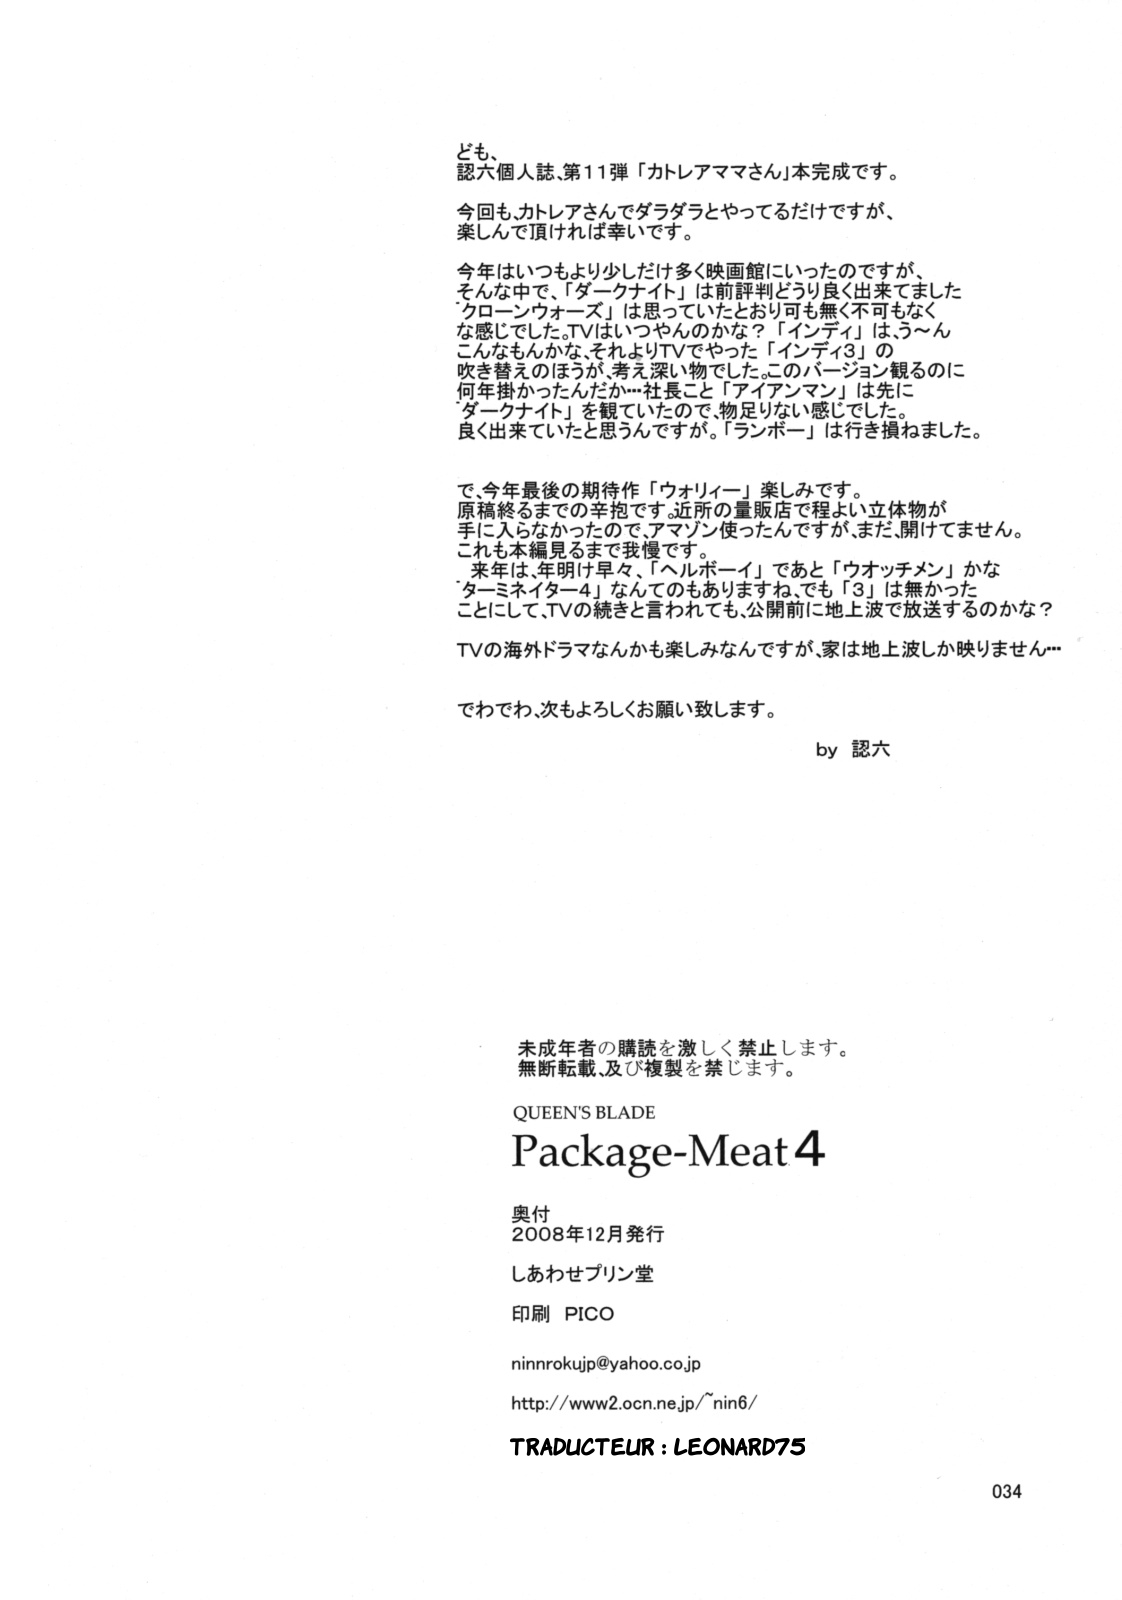 Package Meat 4 numero d'image 32